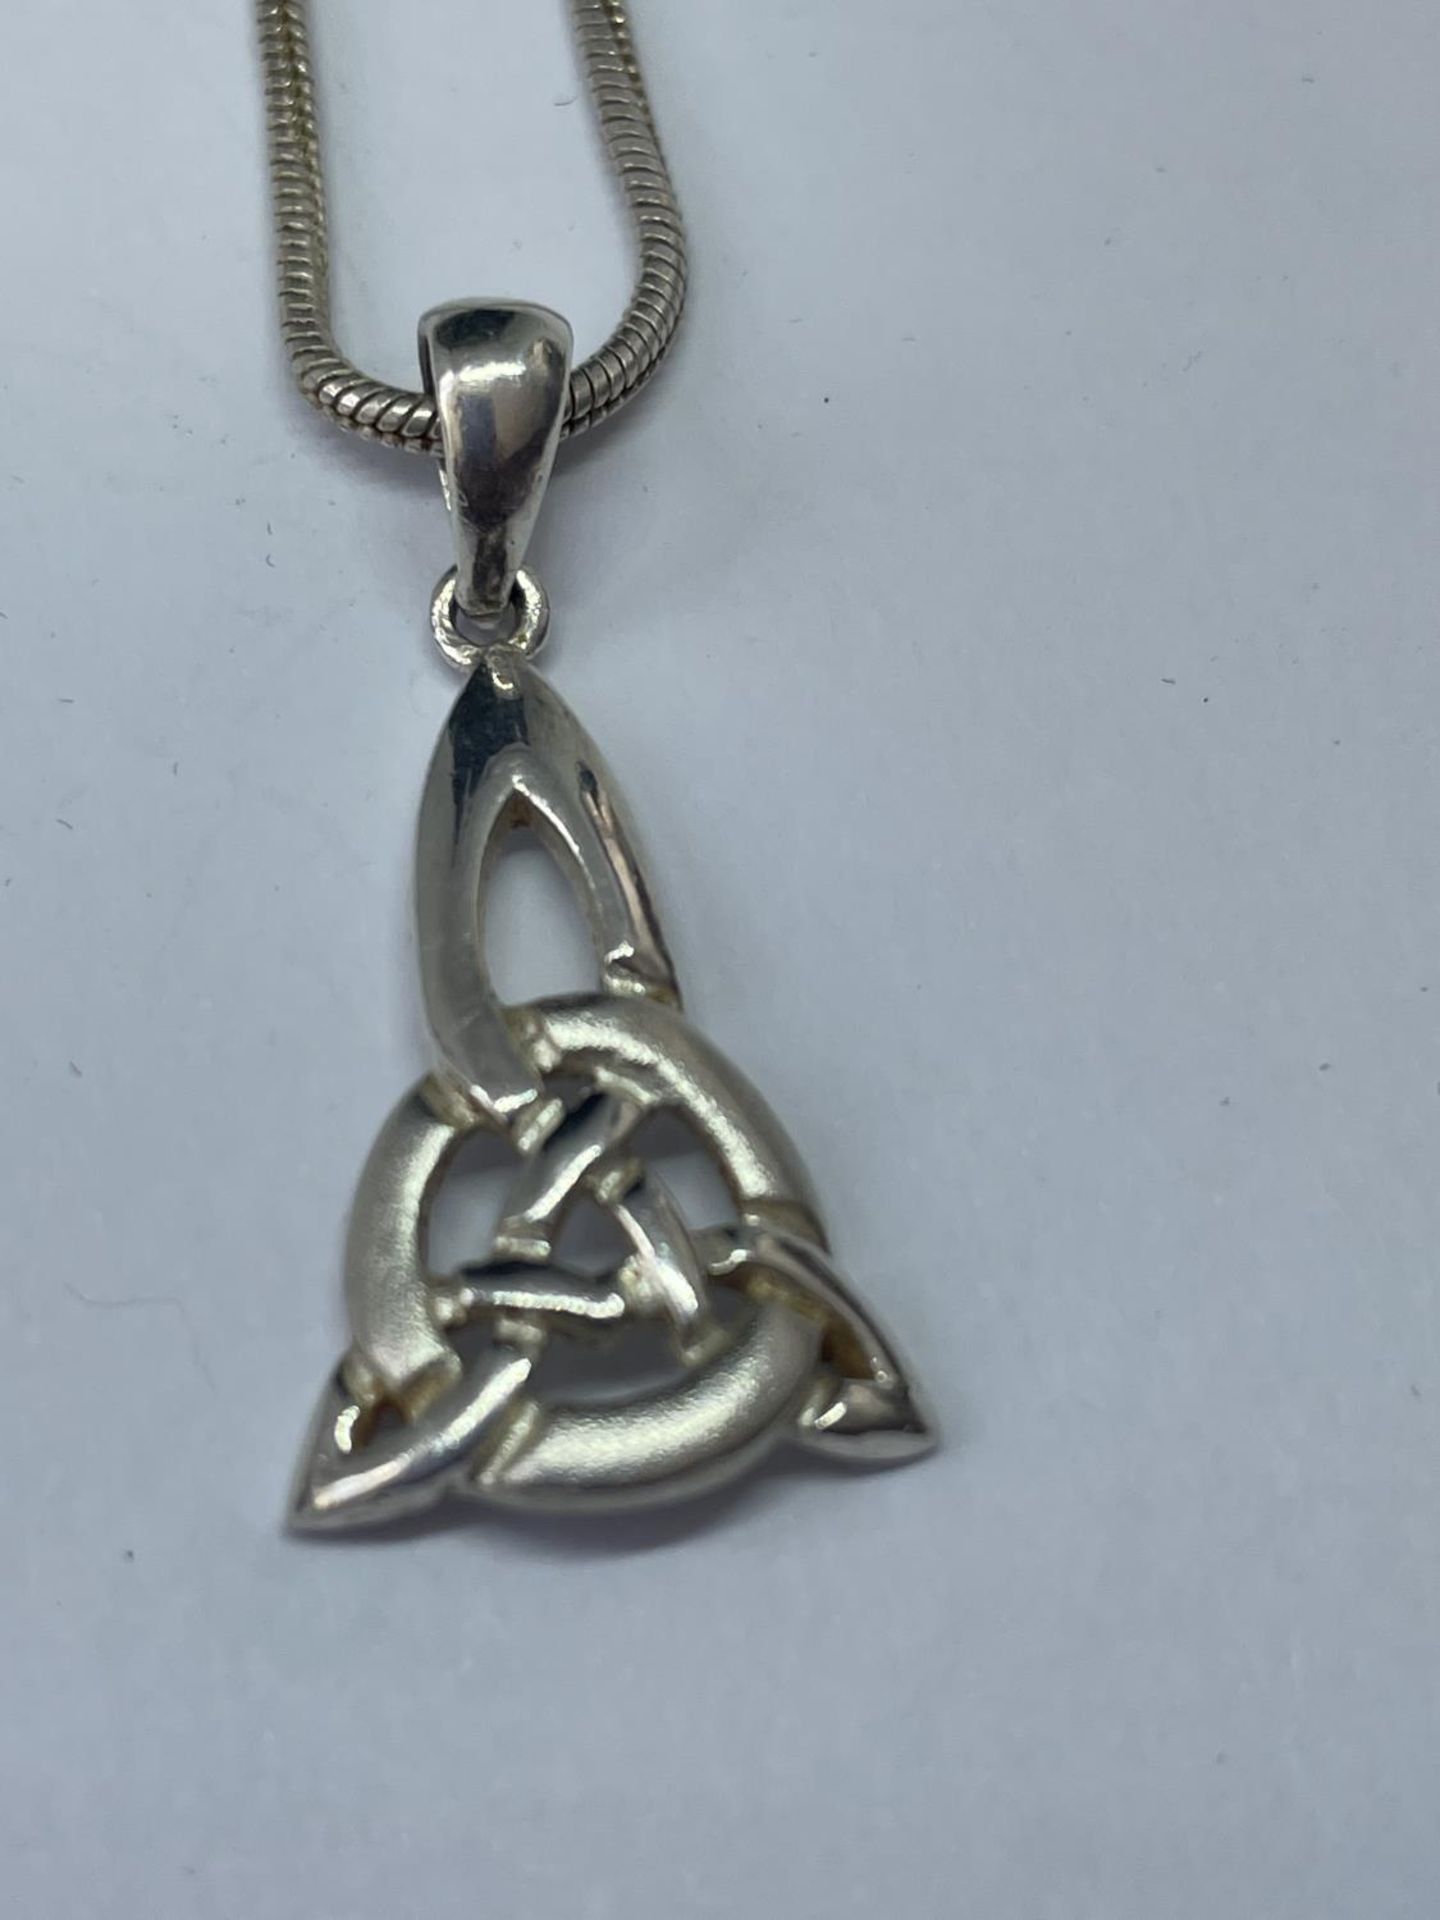 A MARKED SILVER MACKINTOSCH NECKLACE WITH PENDANT AND A RING - Image 2 of 3